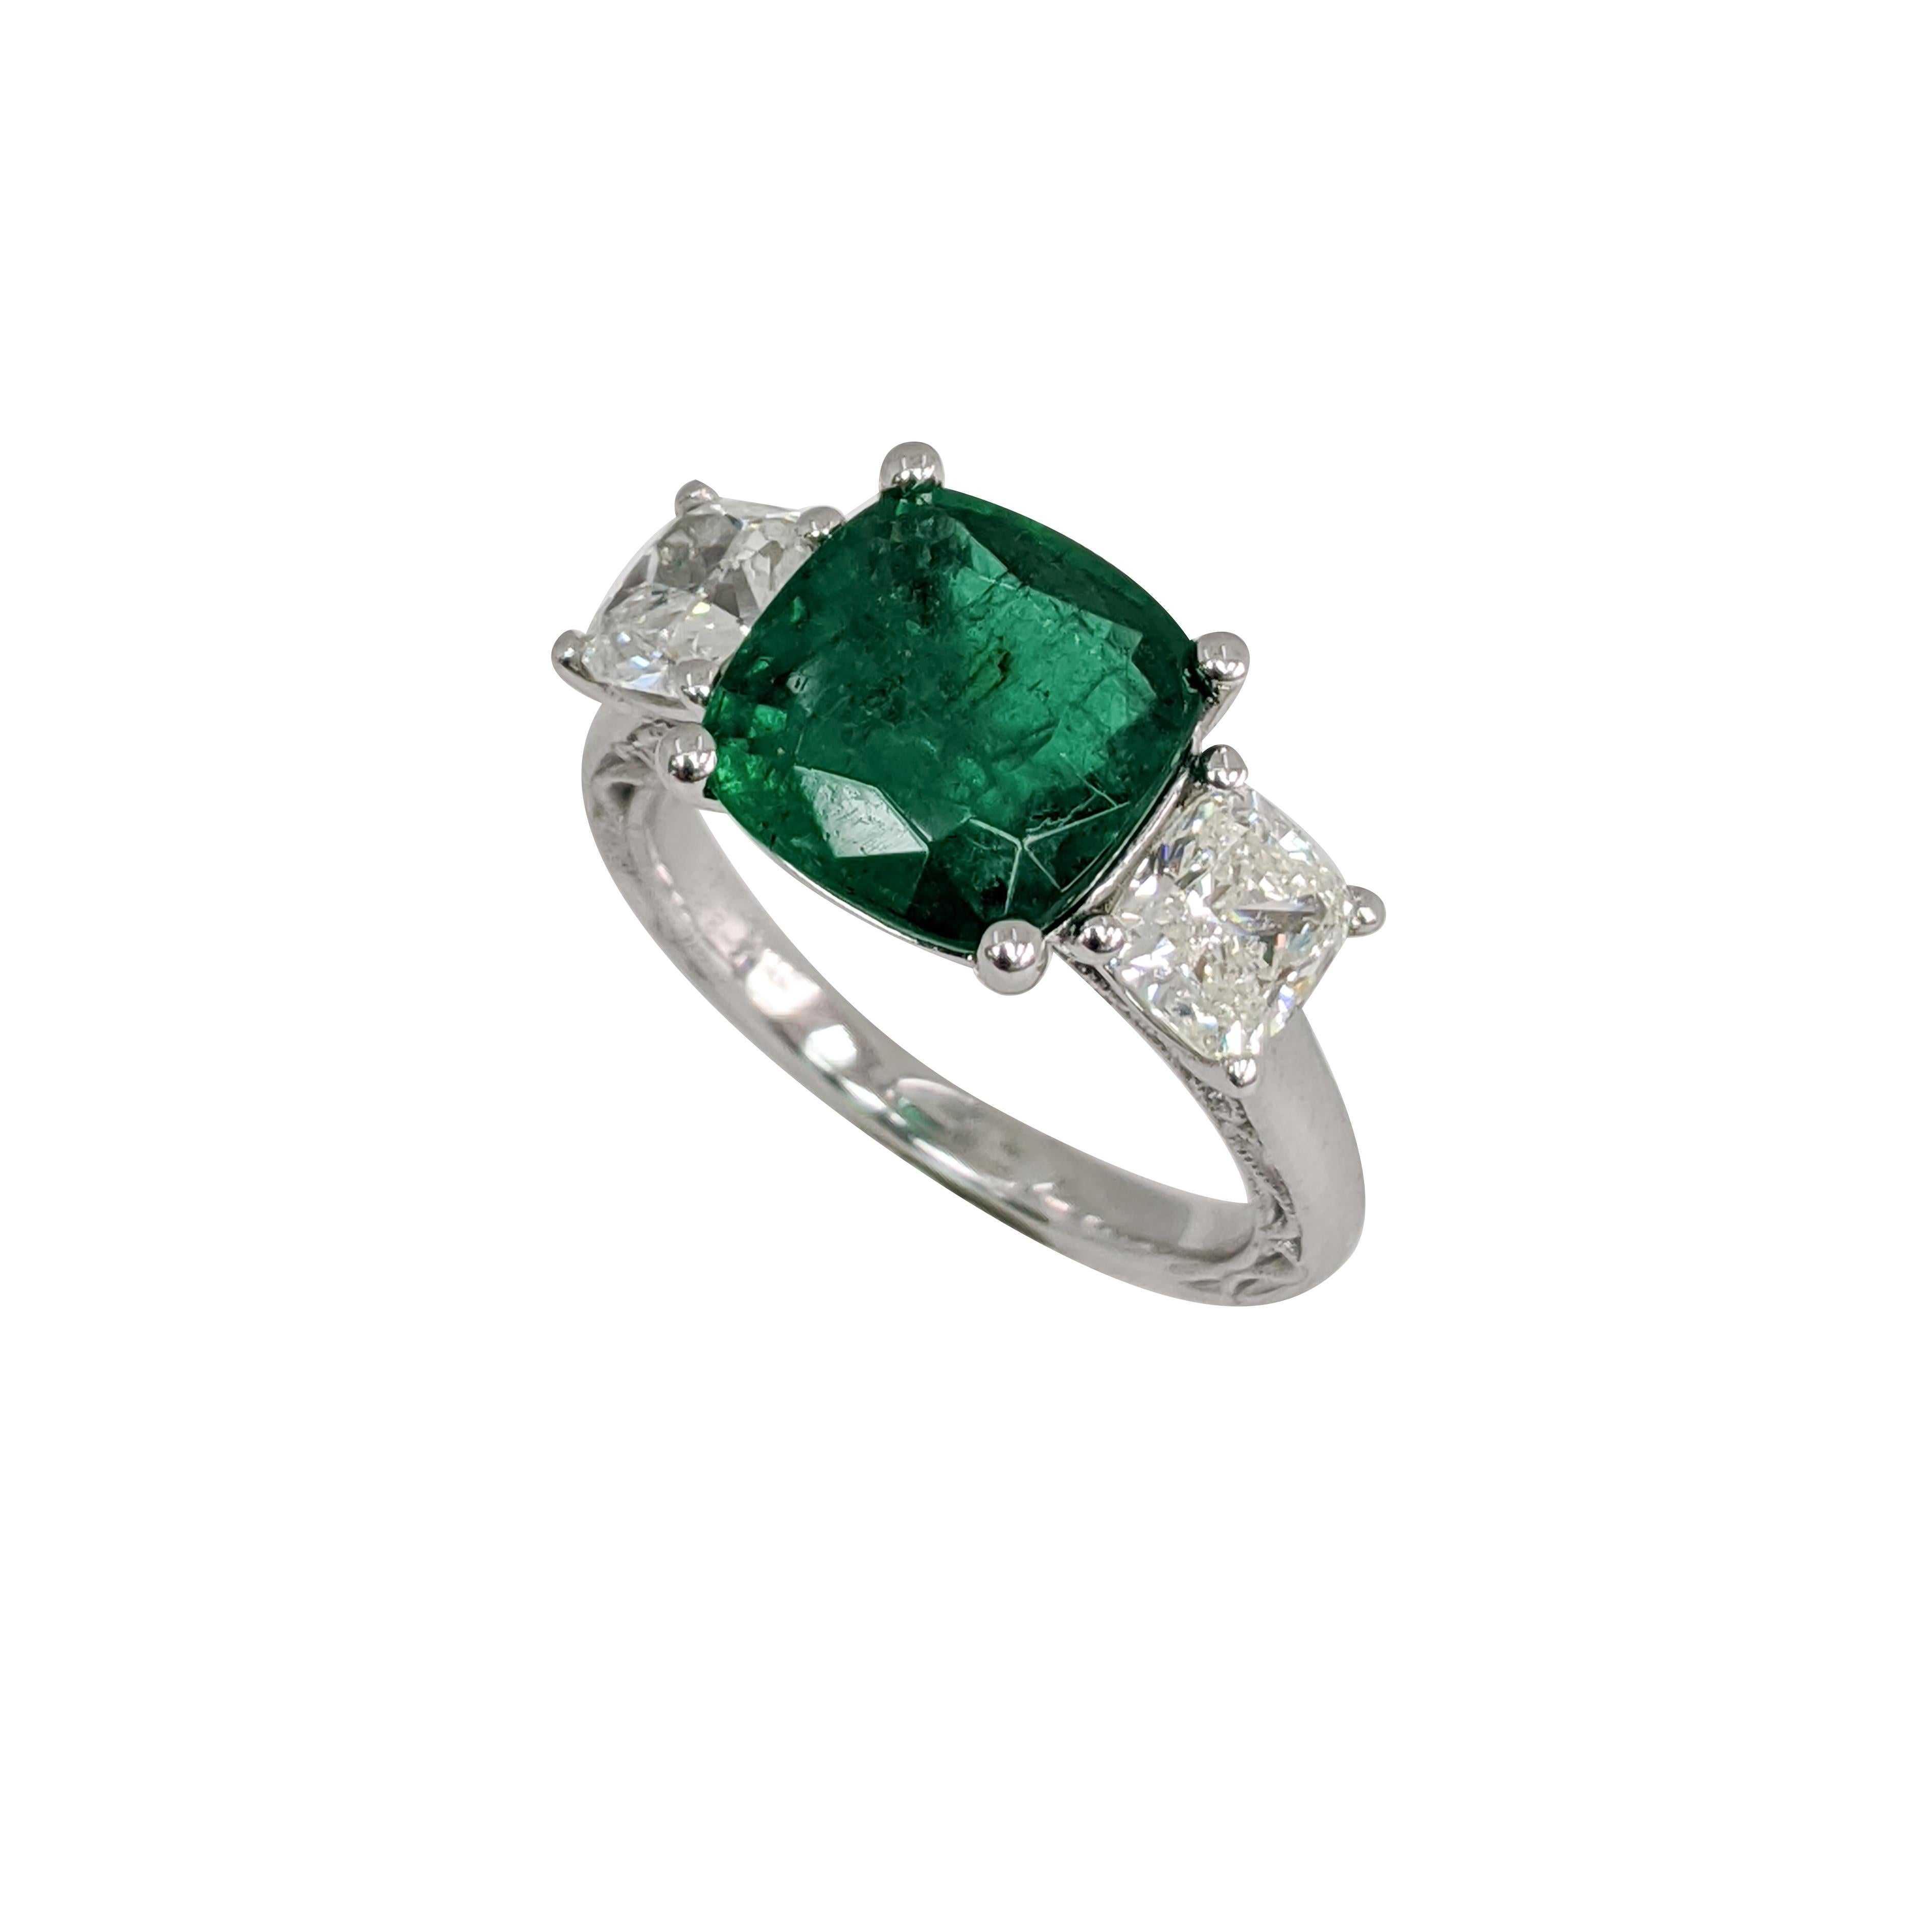 3 stones - One emerald cut emerald, two cushion diamonds. Ring made out of platinum. Art-style is fancy, 16th century. 

1.43ct Cushion Diamond
3.33ct Emerald